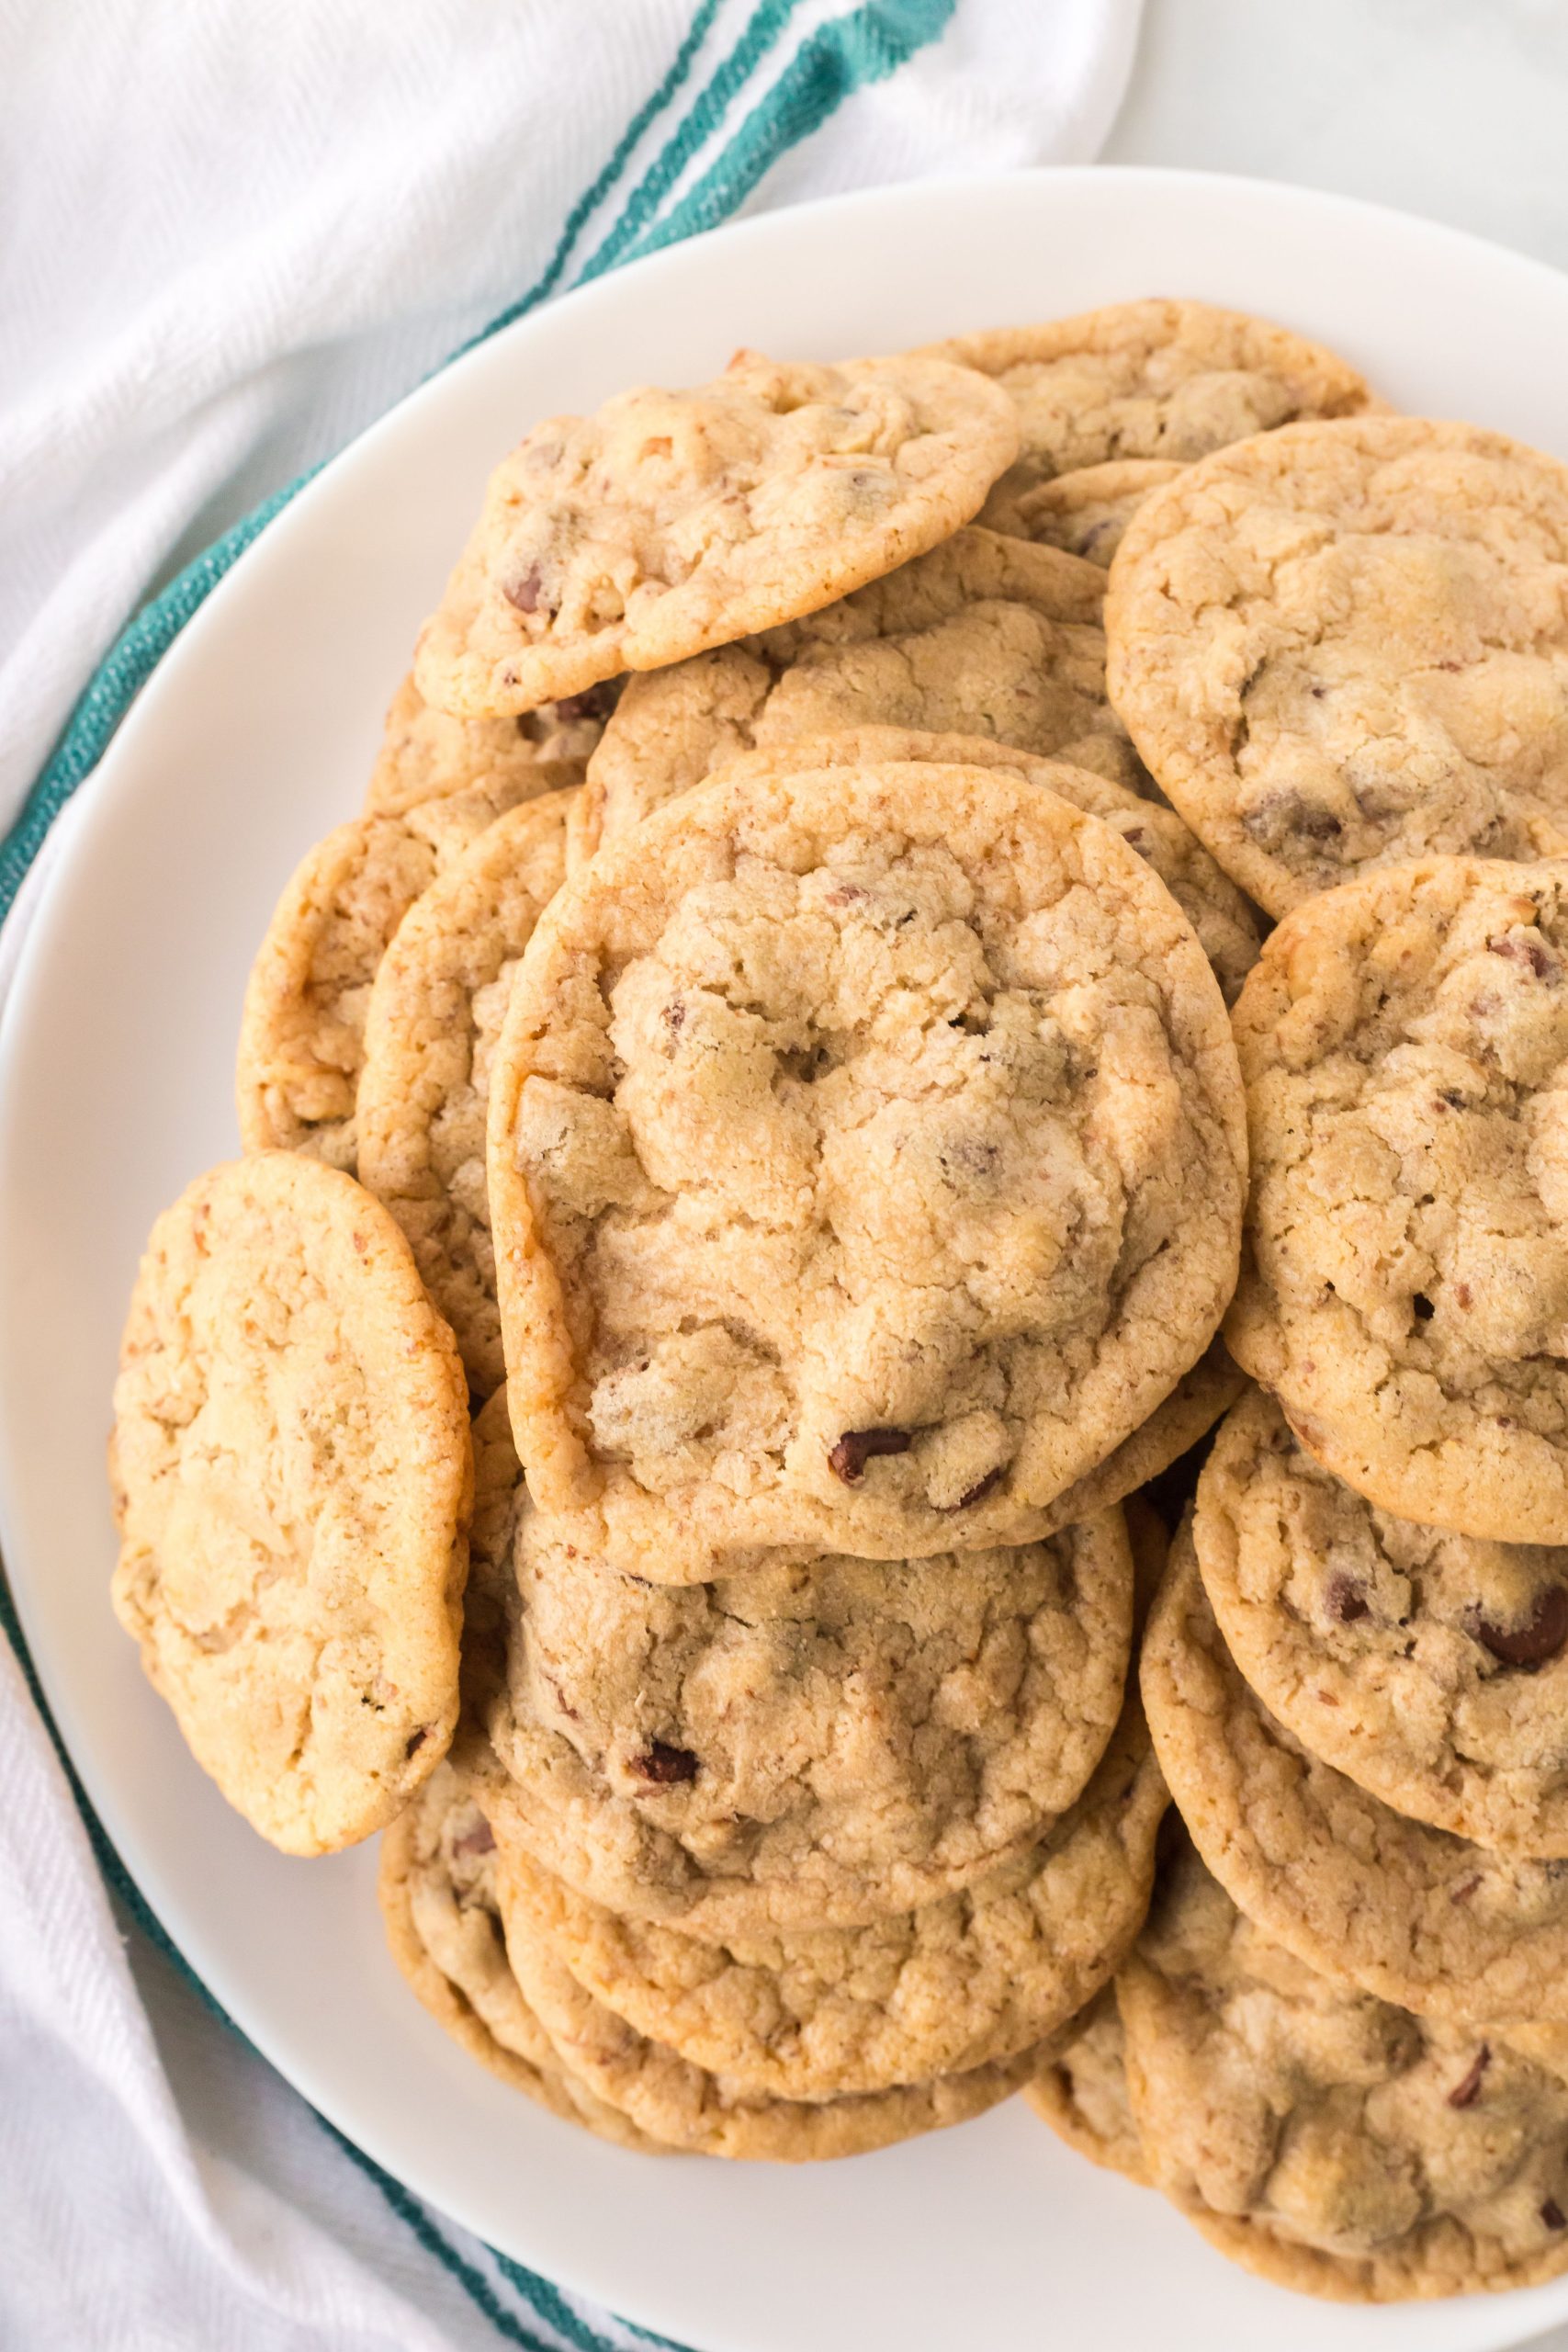 These vegan chocolate chip cookies are easy to make and filled with gooey chocolate. No one will ever know they're vegan! A classic recipe turned vegan.